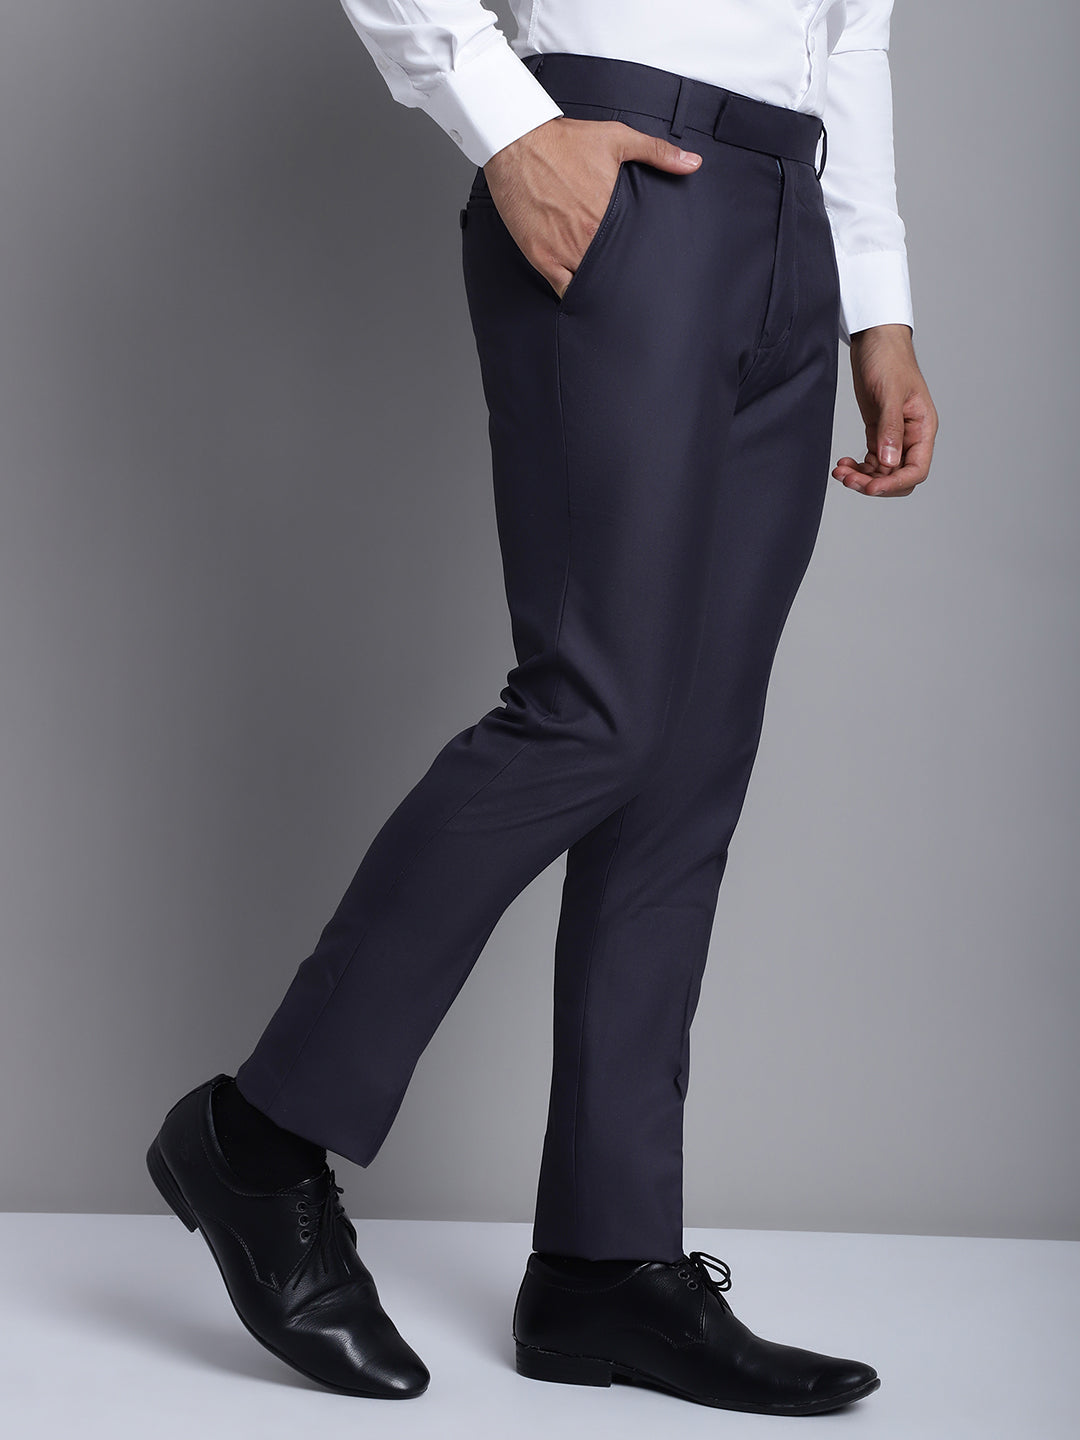 Jainish Men's Grey Tapered Fit Formal Trousers